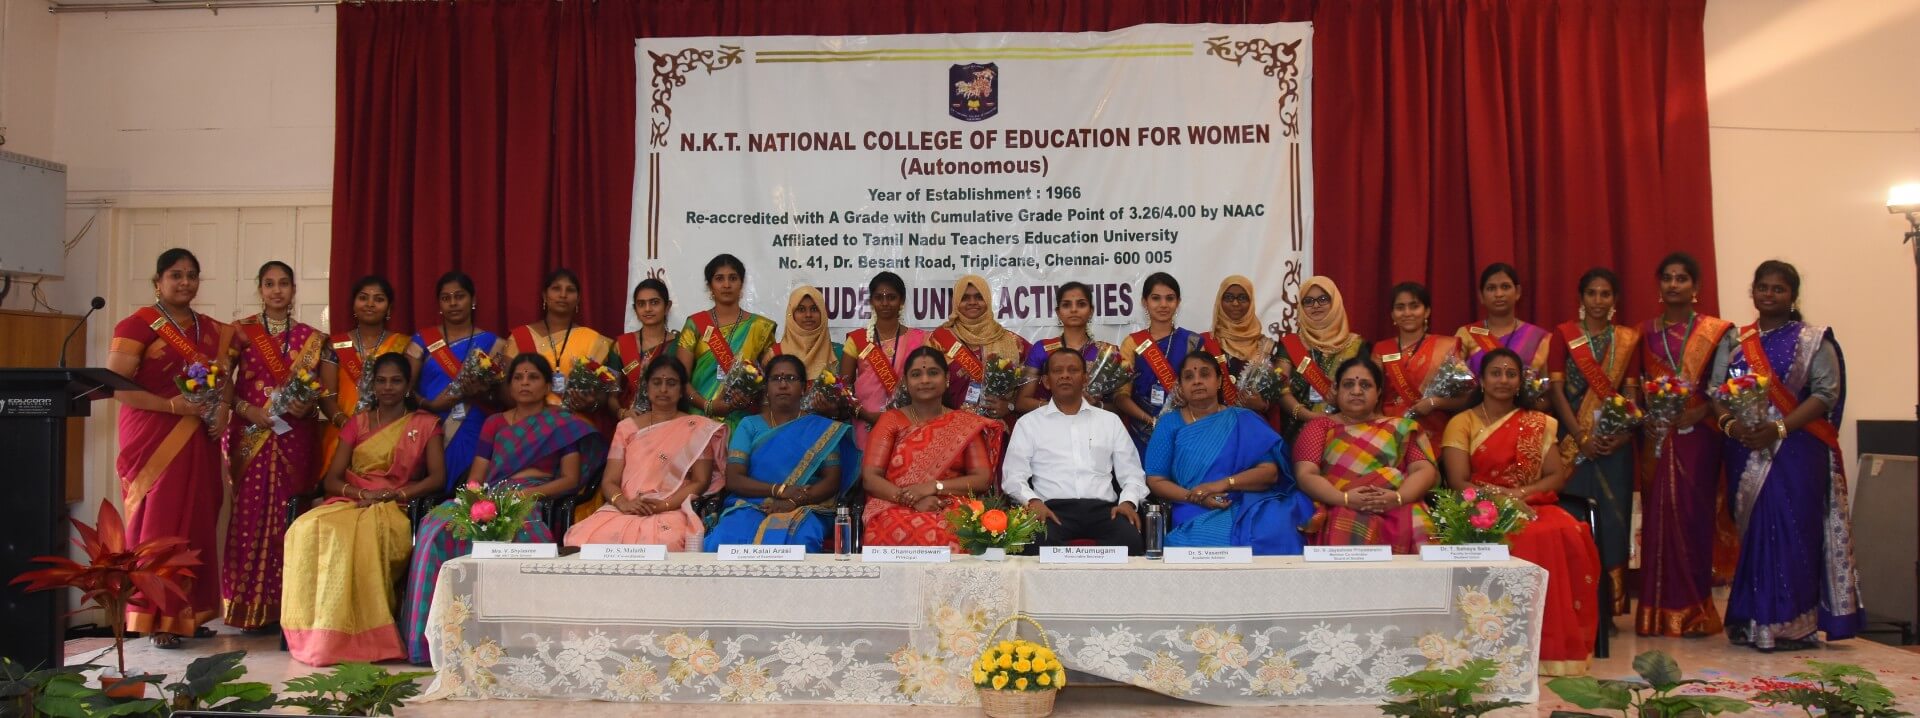 N.K.T. National College of Education for Women, Chennai Image